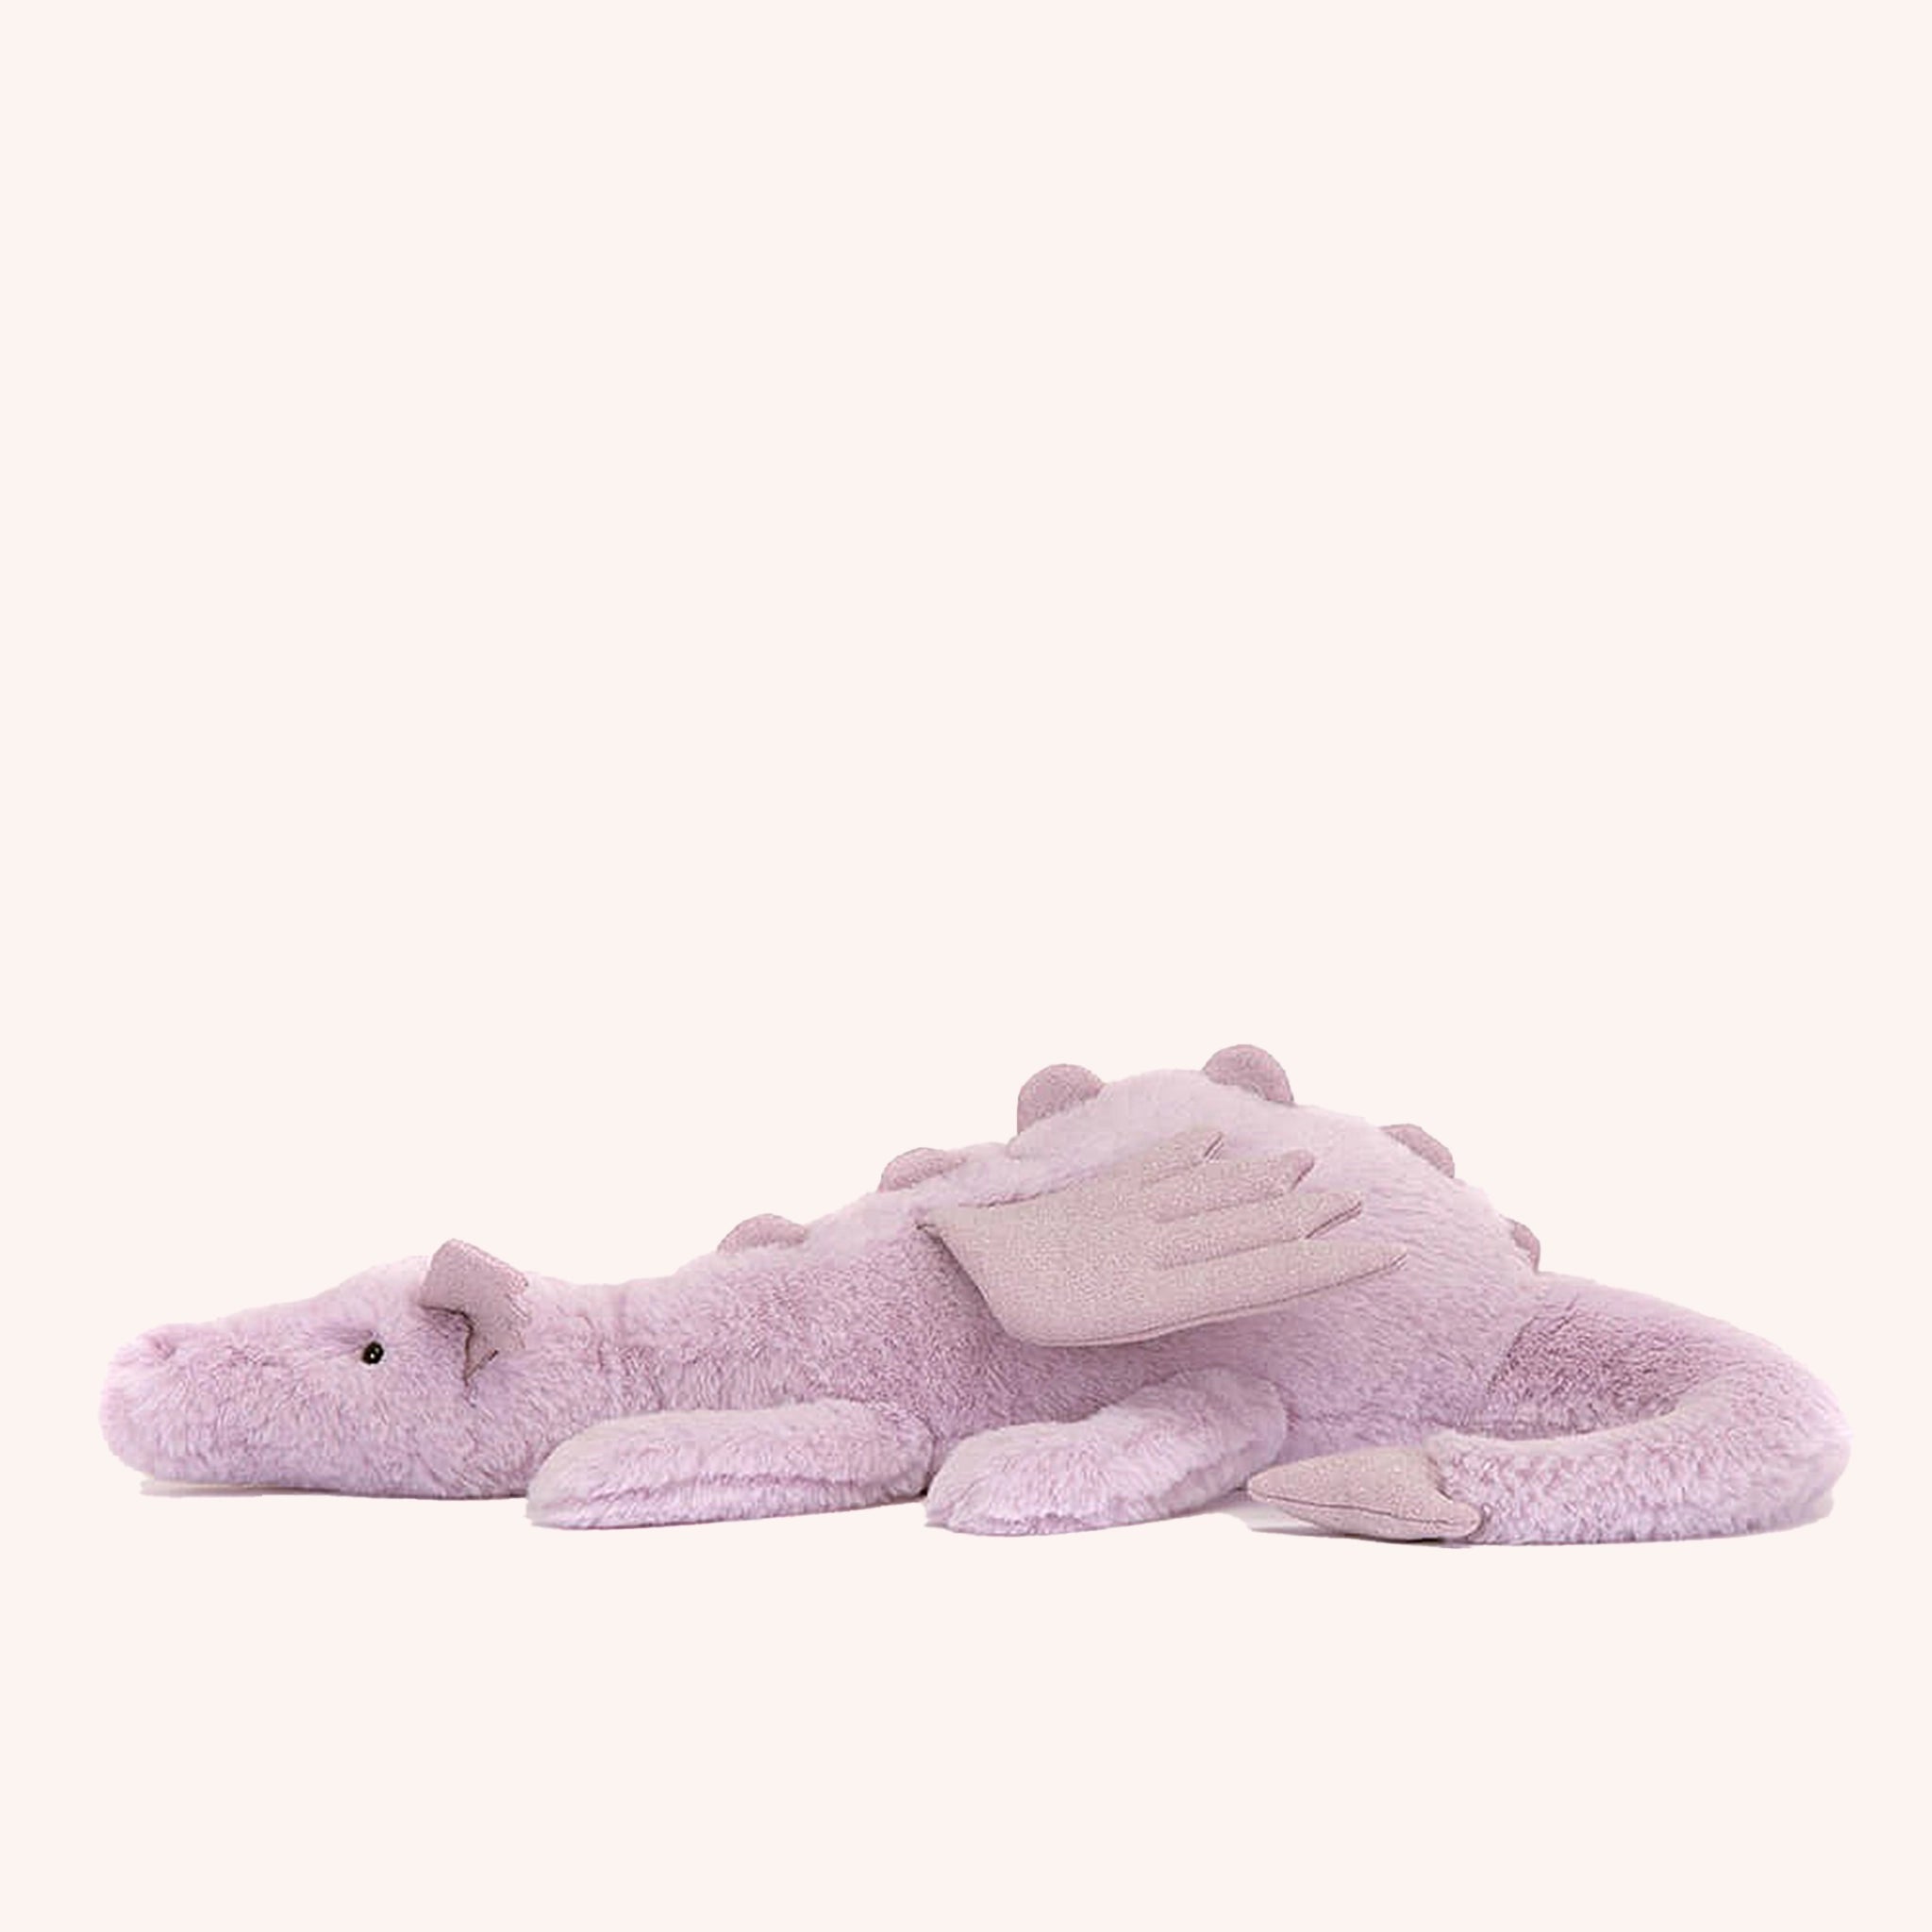 On a white background is a light purple dragon stuffed animal with wings, a sweet face and a long tail.